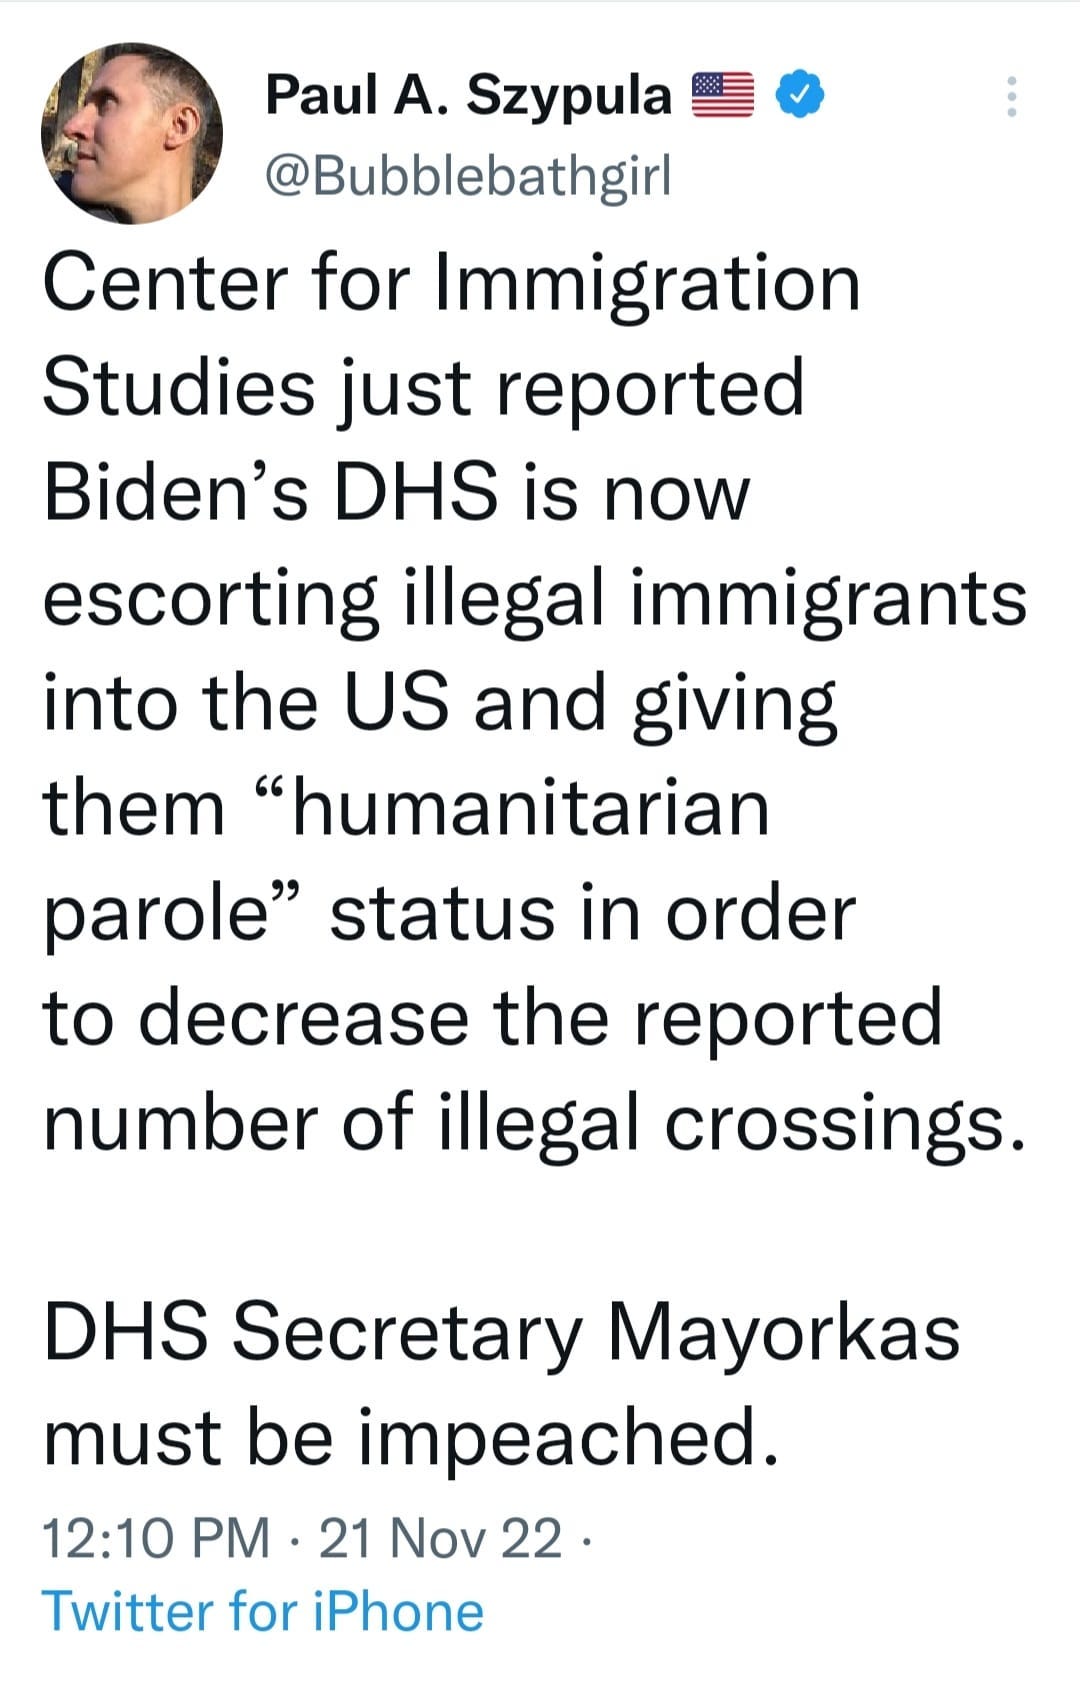 May be an image of 1 person and text that says 'Paul A. Szypula @Bubblebathgirl Center for mmigration Studies just reported Biden's DHS is now escorting illegal immigrants into the US and giving them "humanitarian parole" status in order to decrease the reported number of illegal crossings. DHS Secretary Mayorkas must be impeached. 12:10 PM 21 Nov 22. Twitter for iPhone'